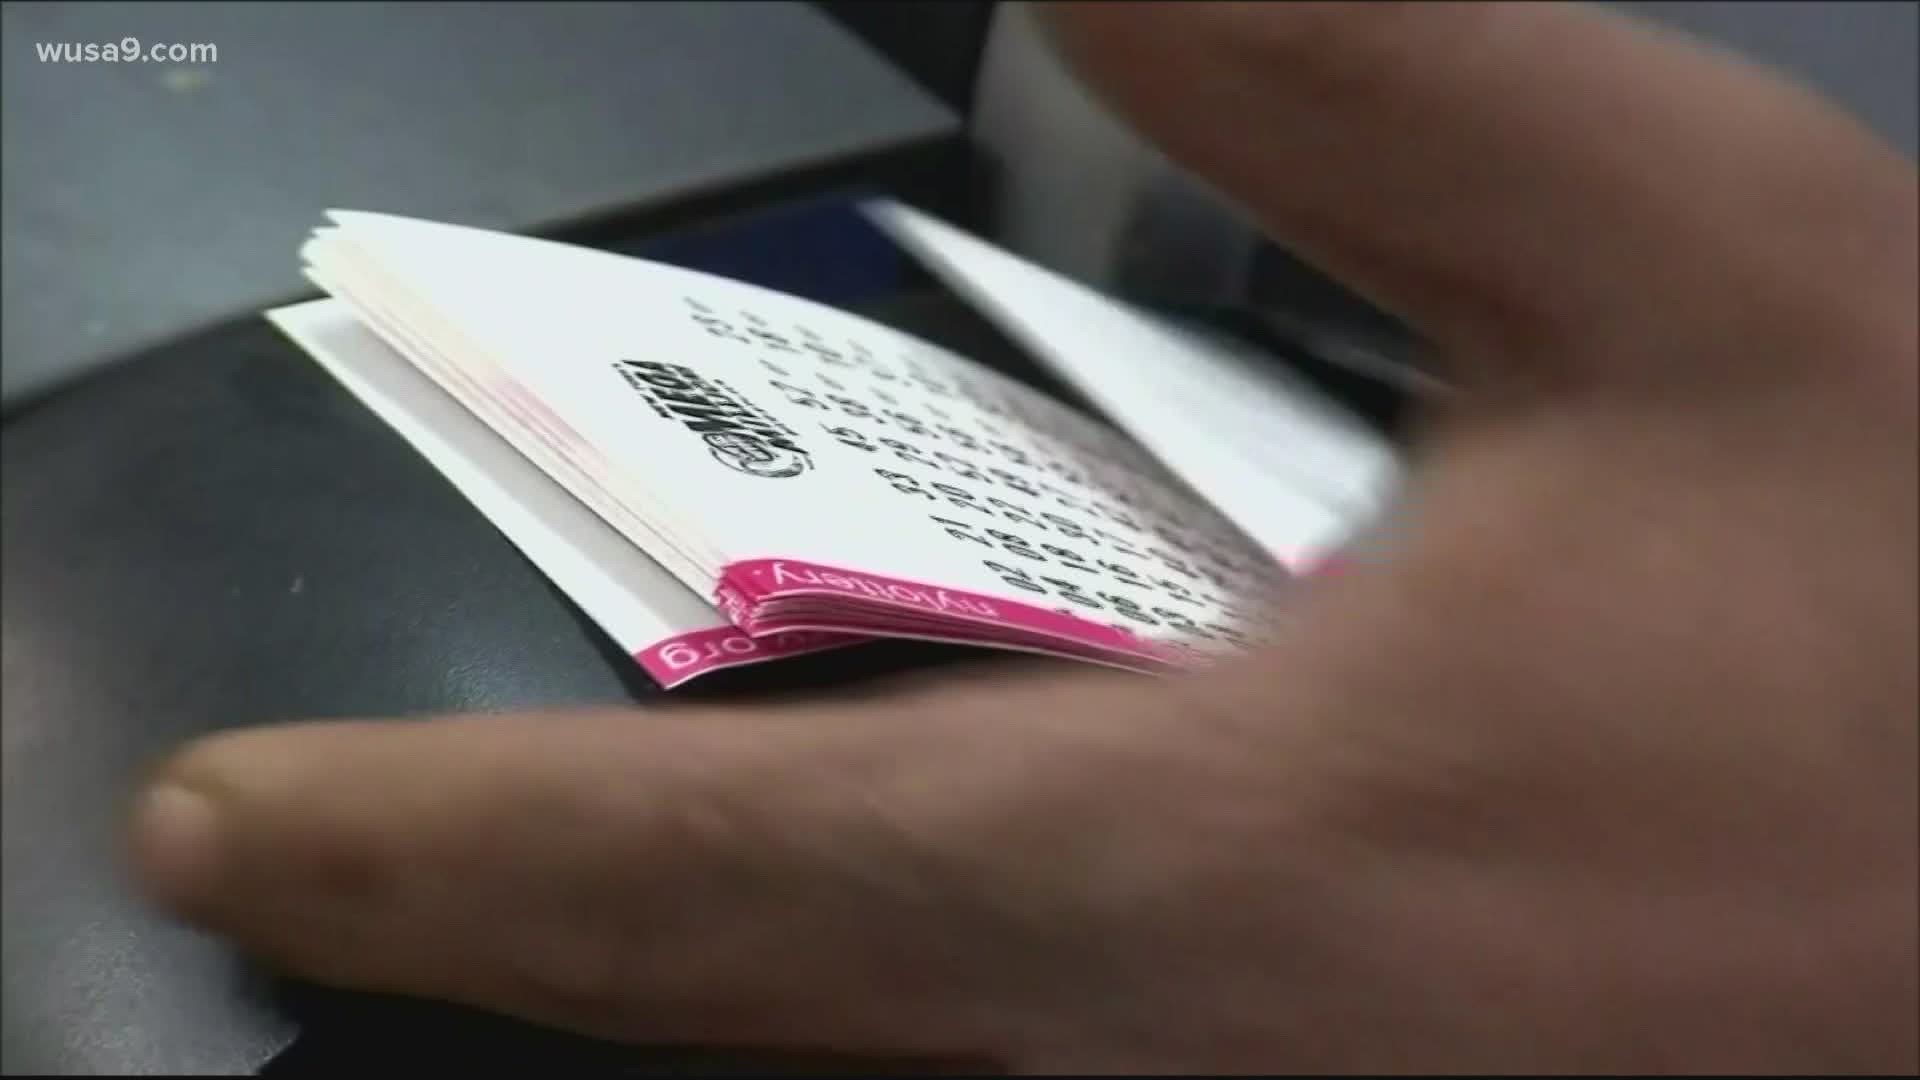 Although it took the winner four months after the drawing to come forward, lottery officials say they still had plenty of time to claim the prize.